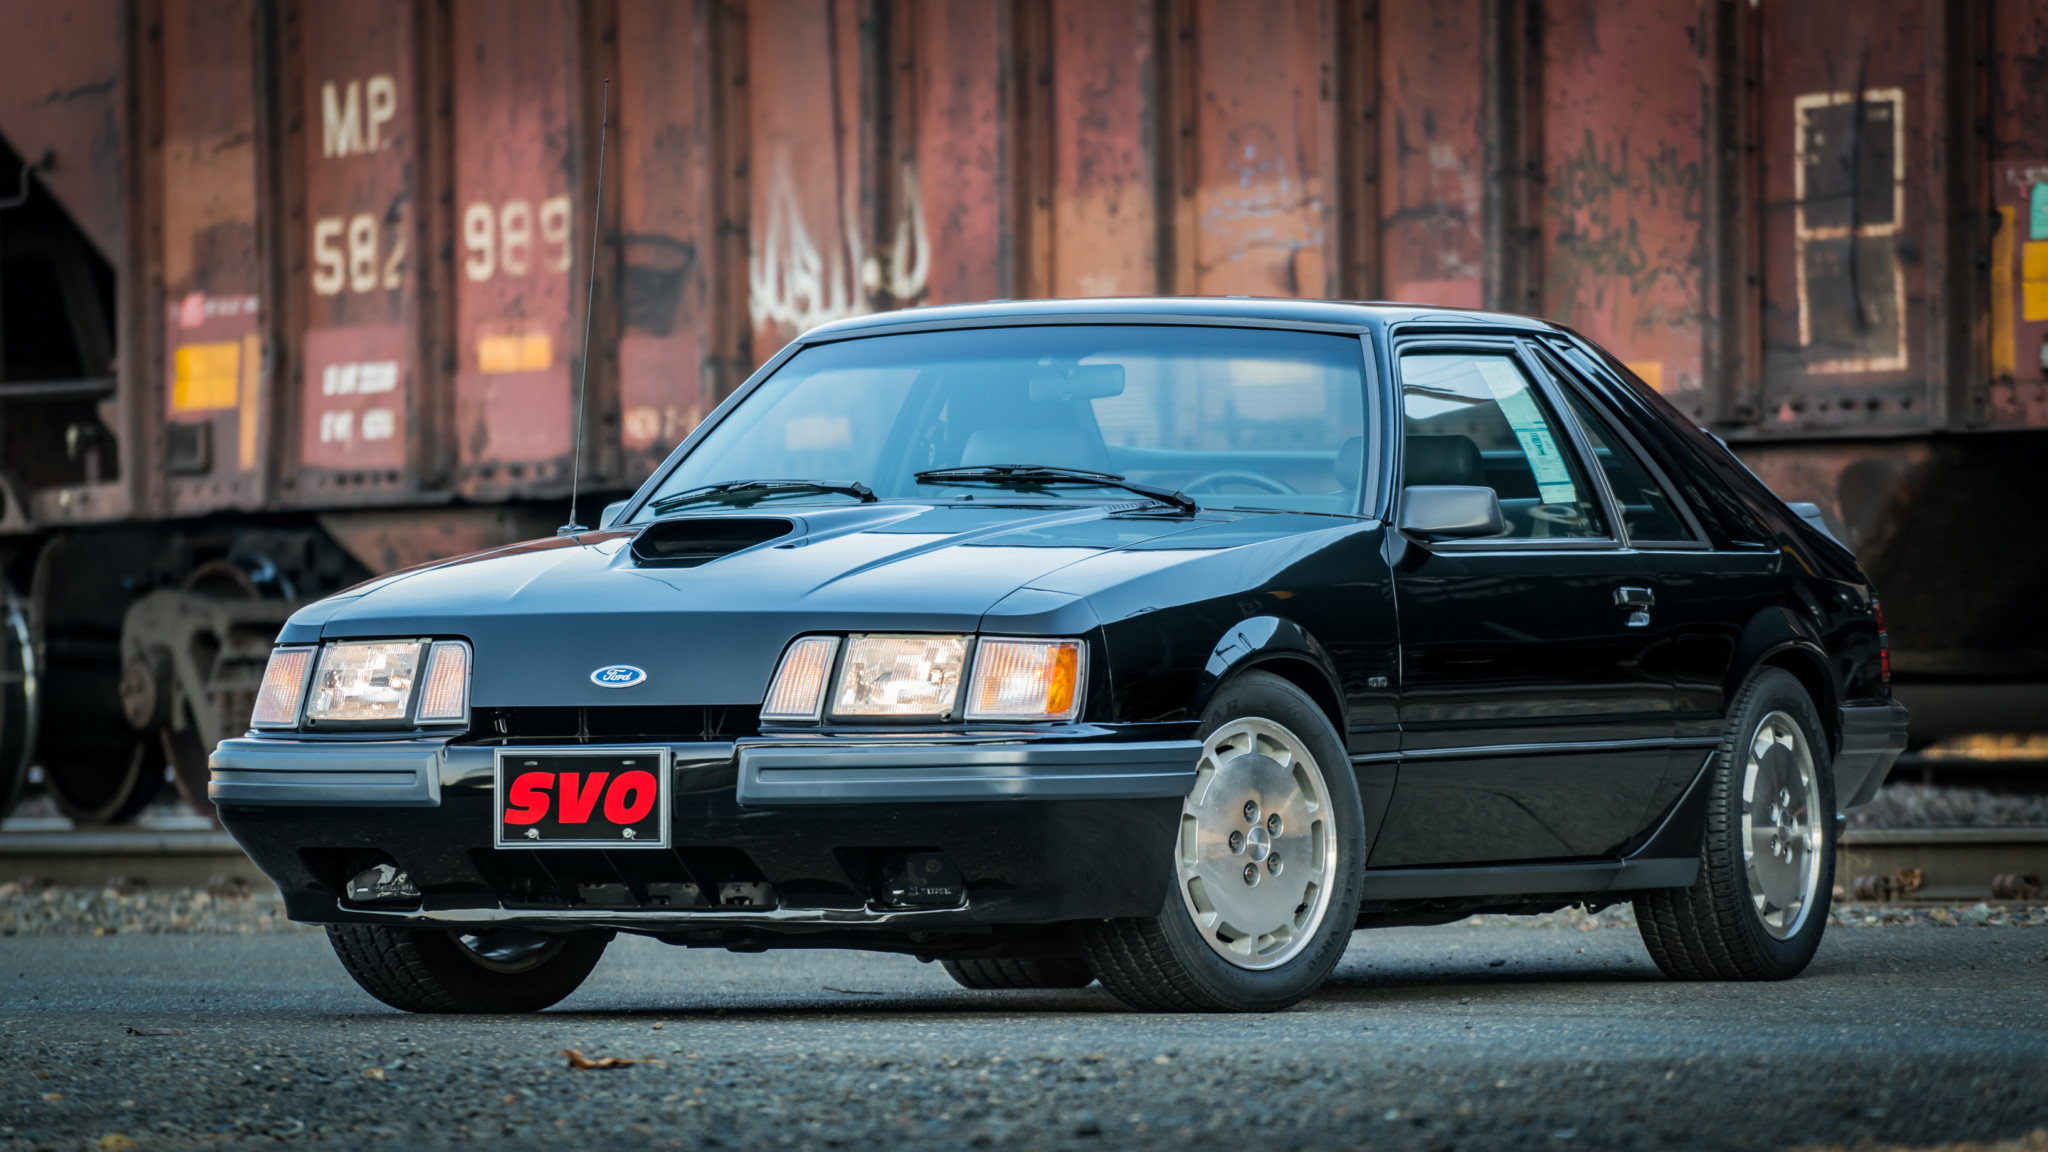 1986 Ford Mustang Svo Hd Wallpaper Achtergrond 2048x1152